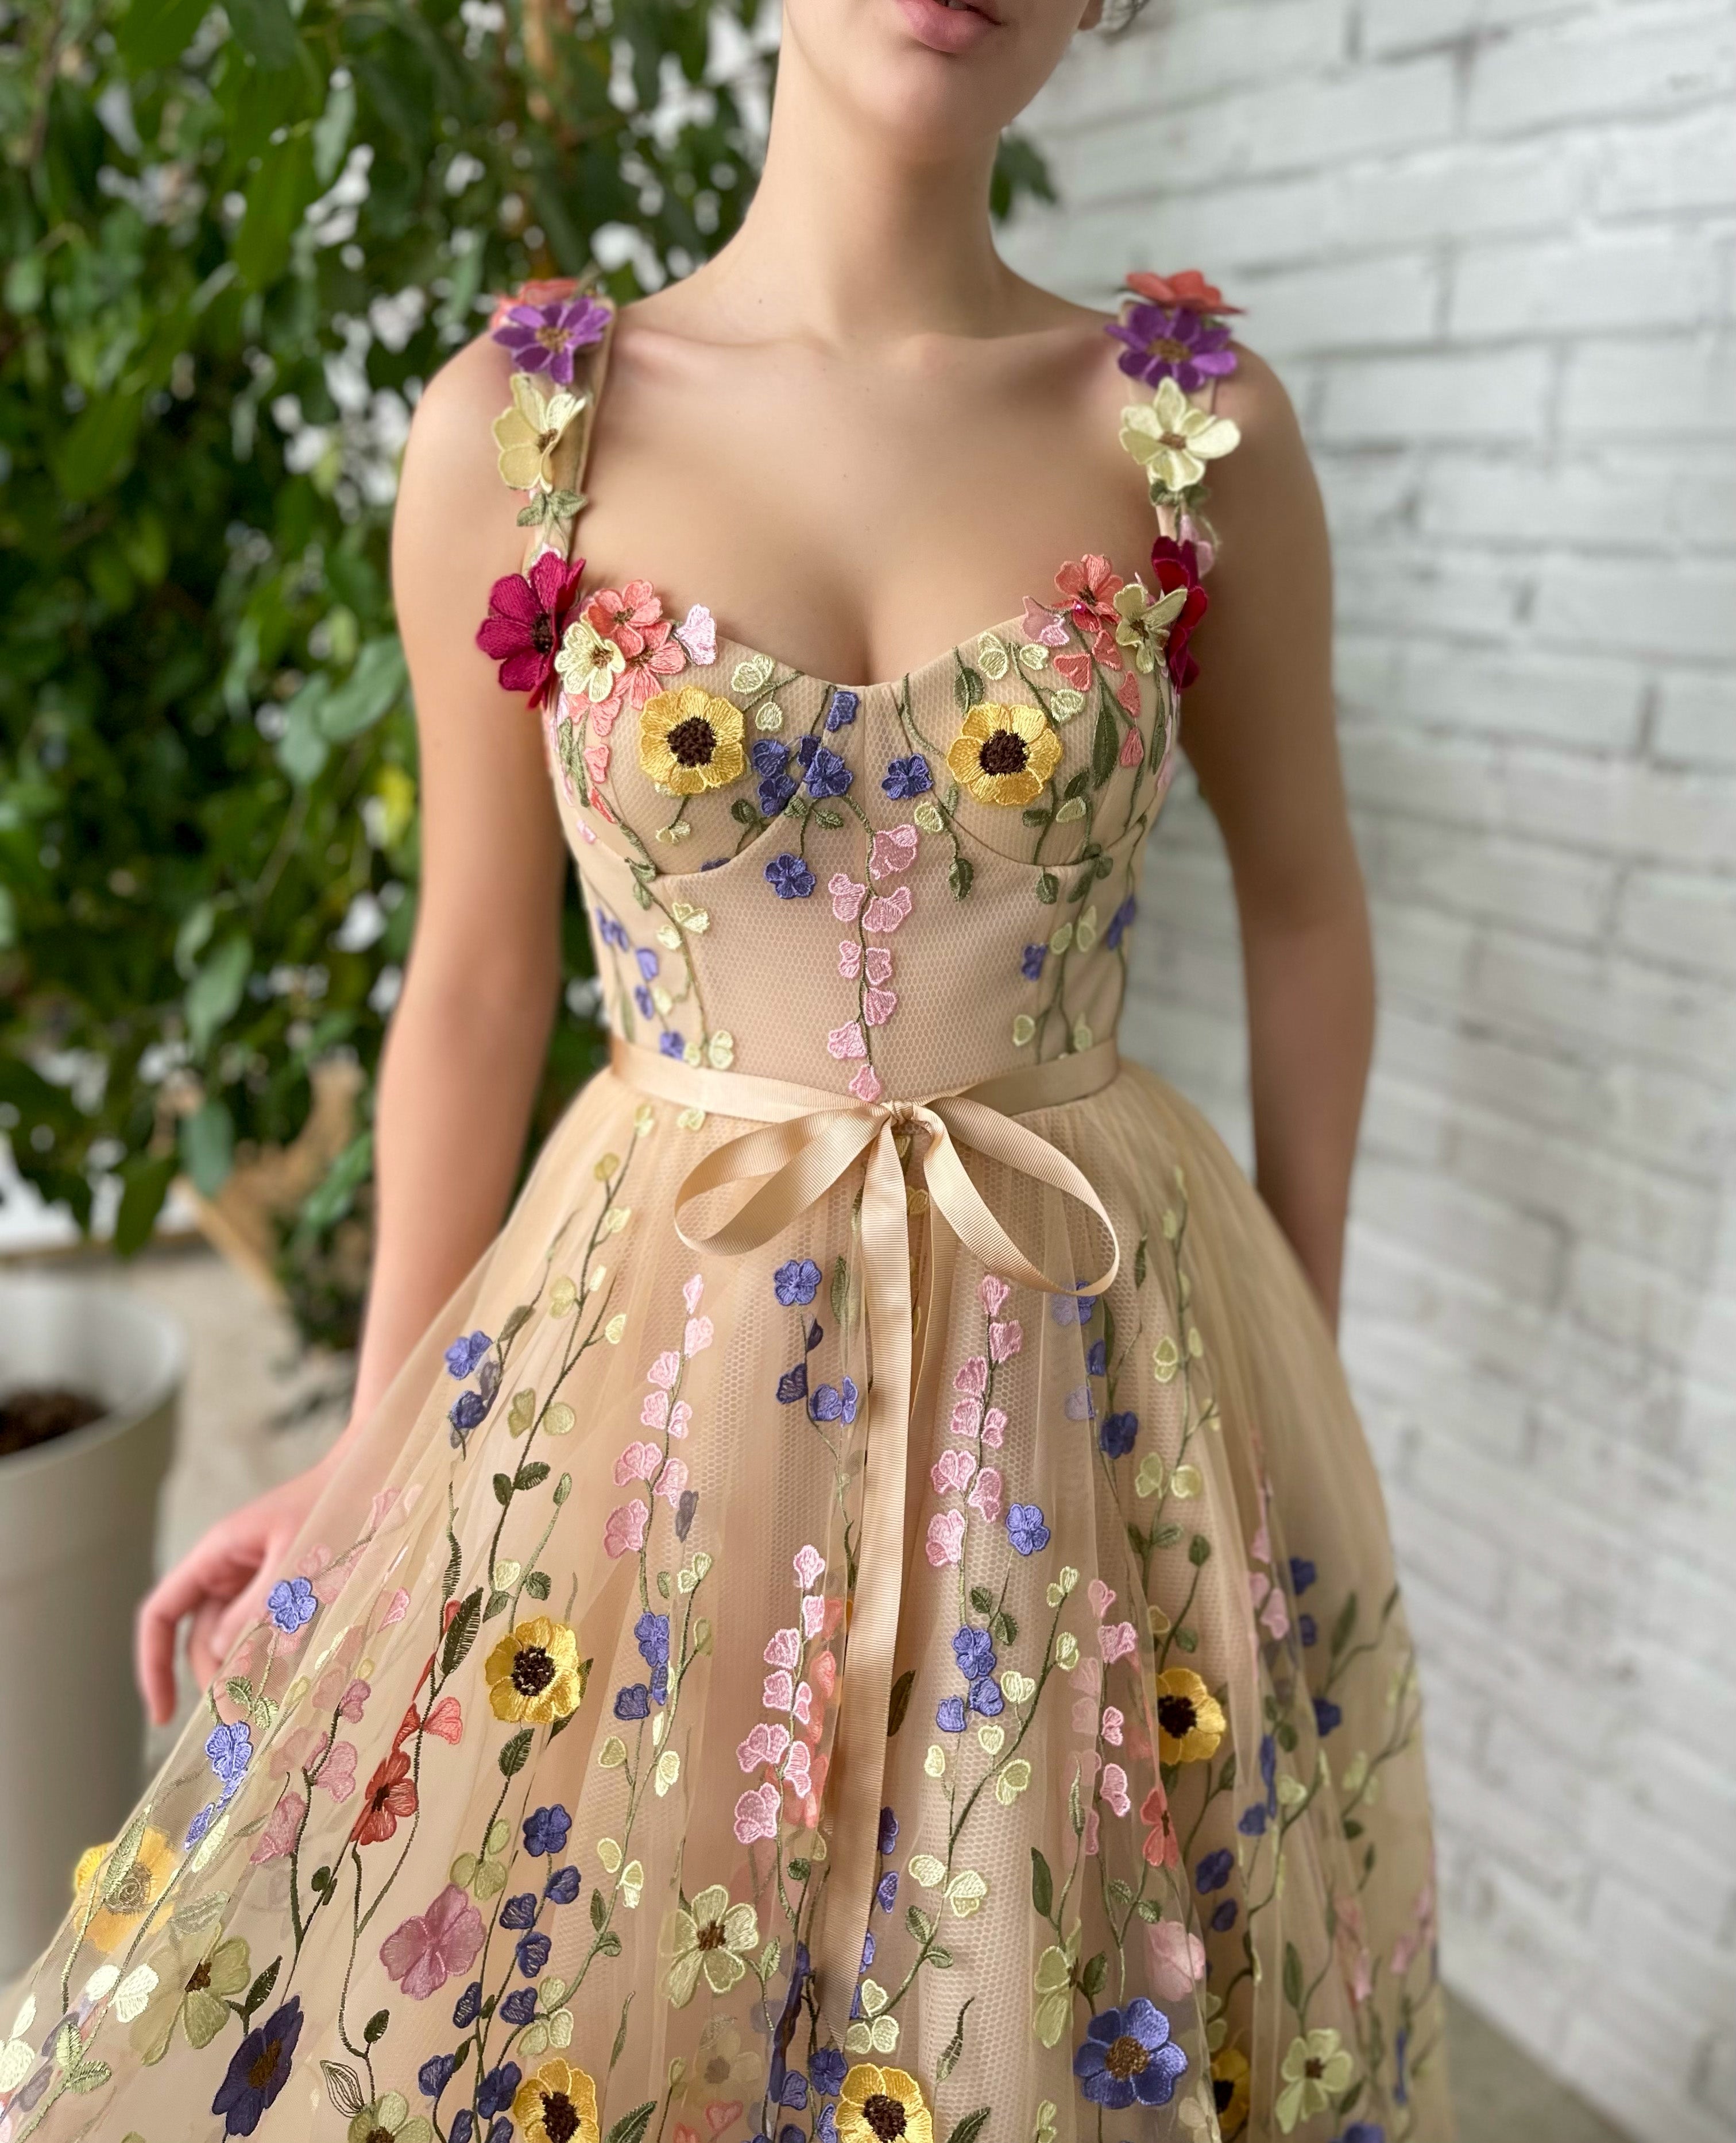 Beige A-Line dress with flowers, spaghetti straps and embroidery